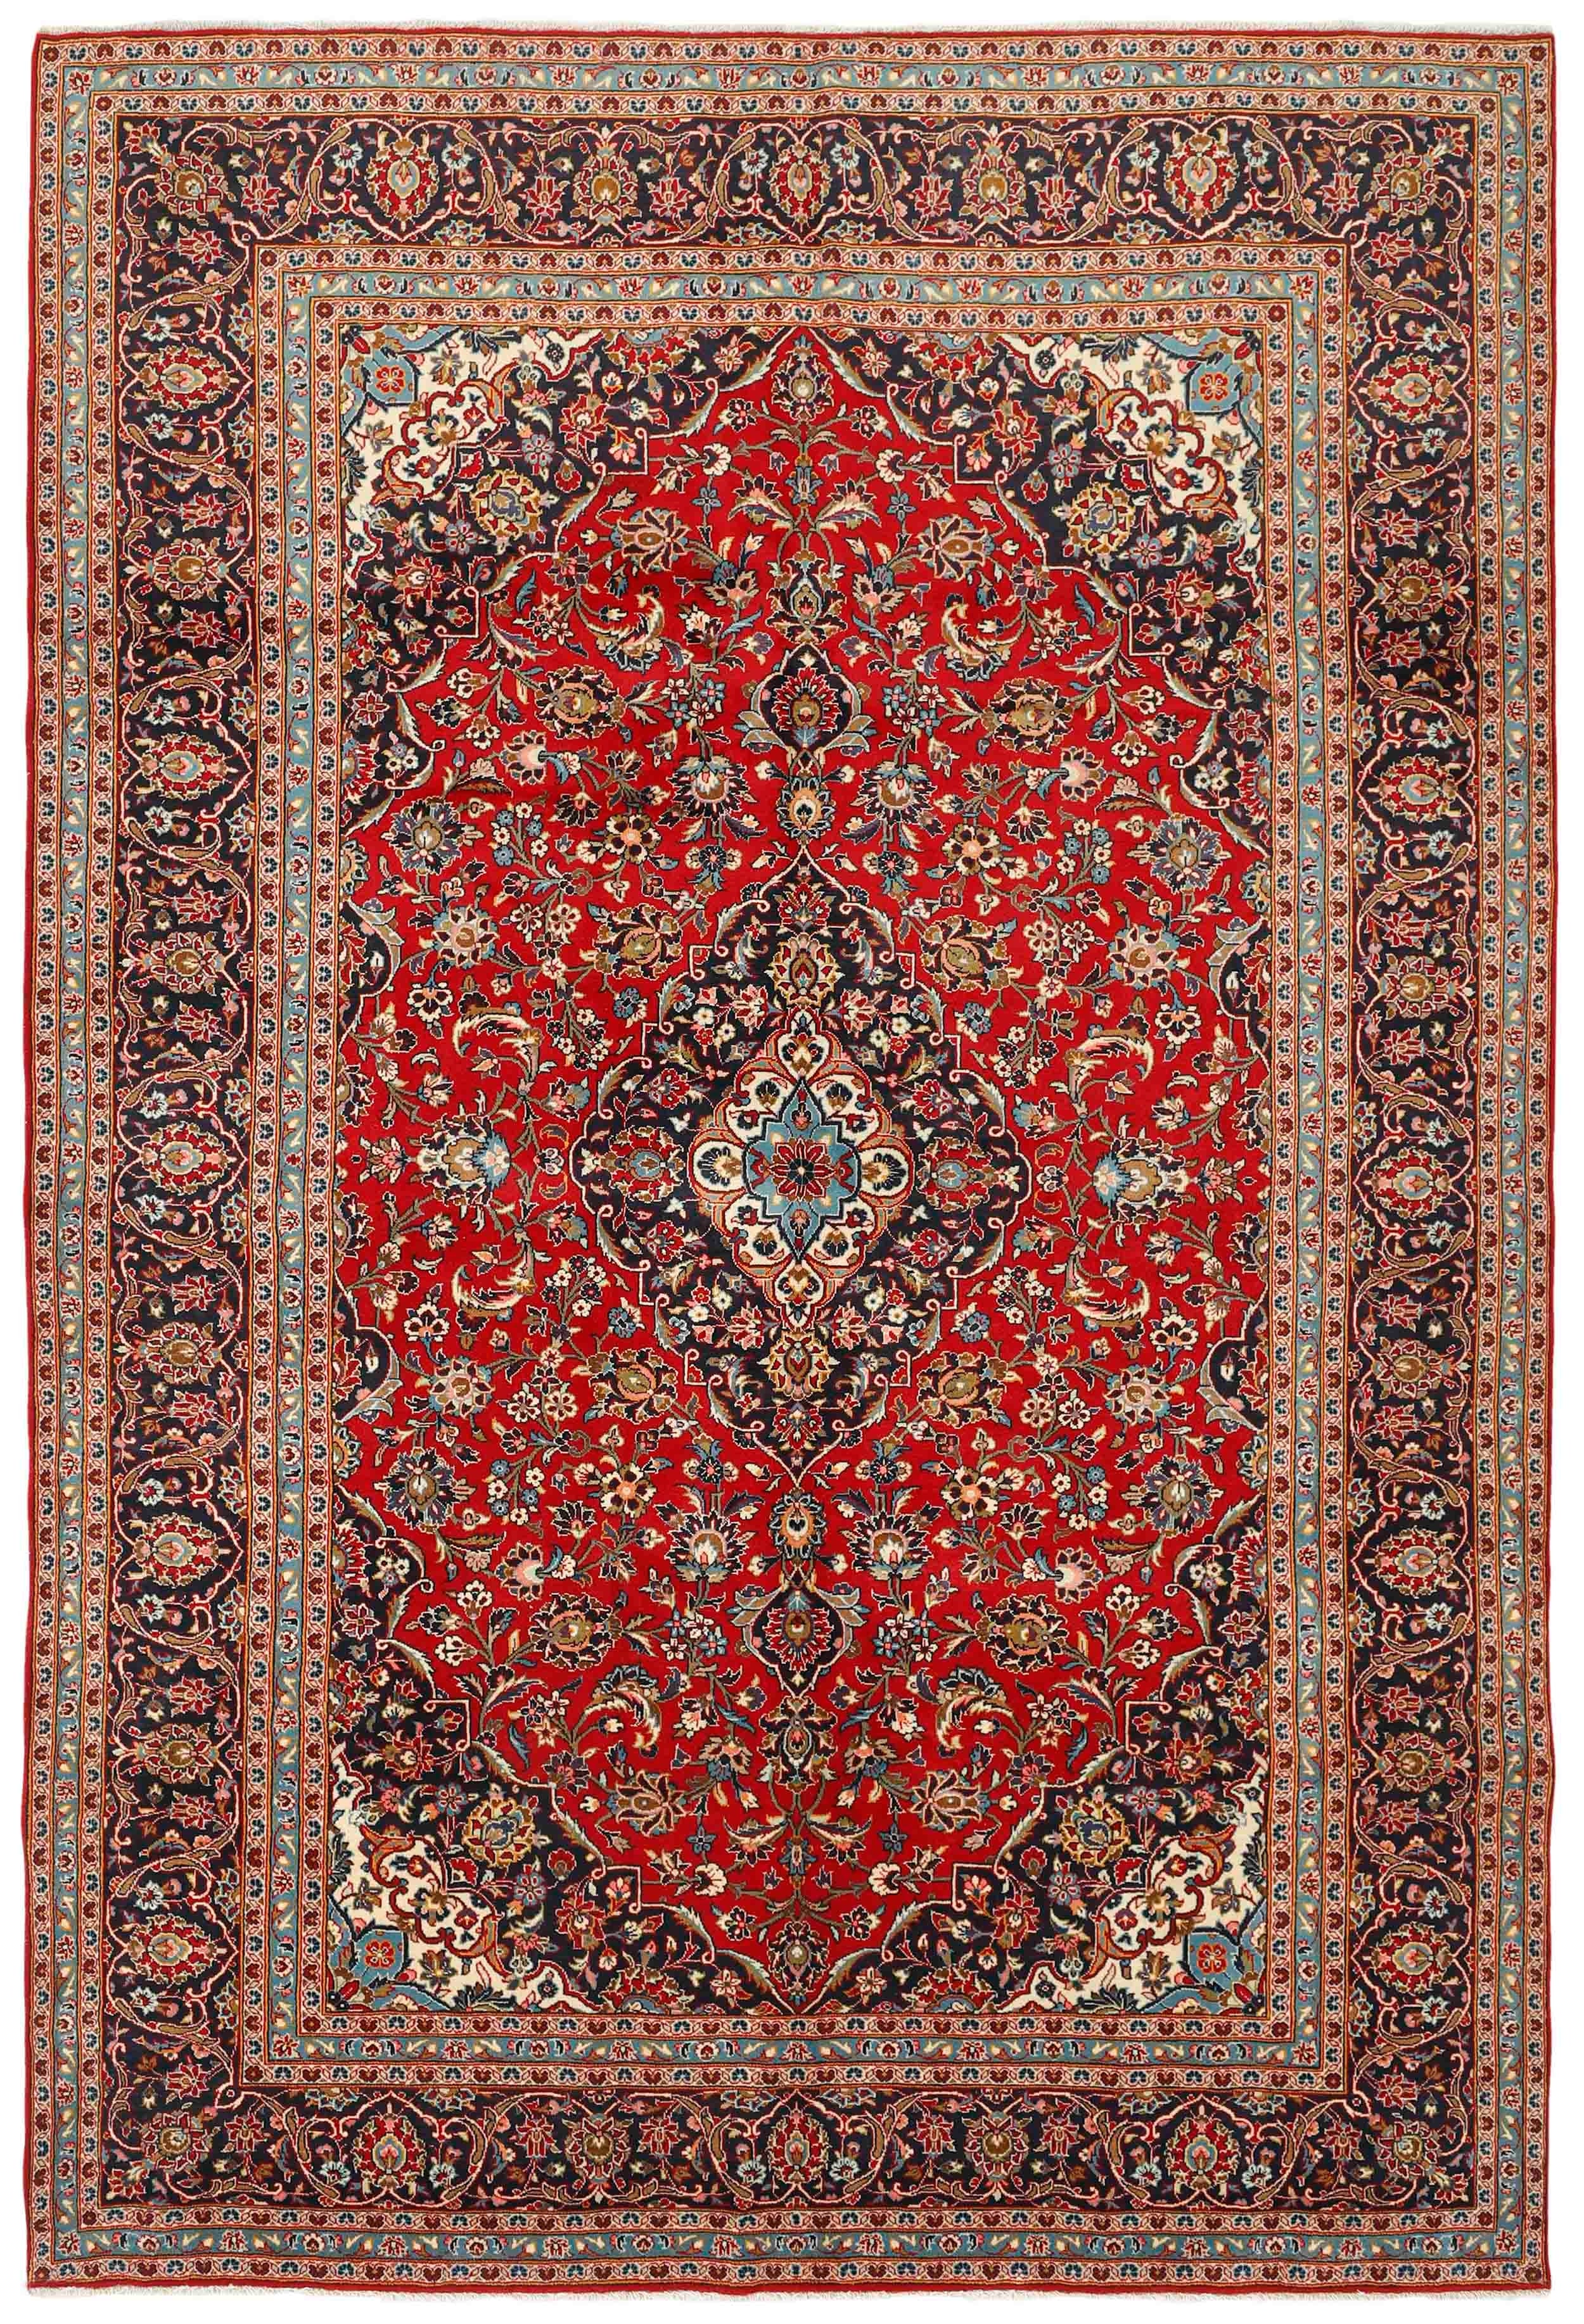 Authentic persian rug with Traditionalfloral design in red and blue